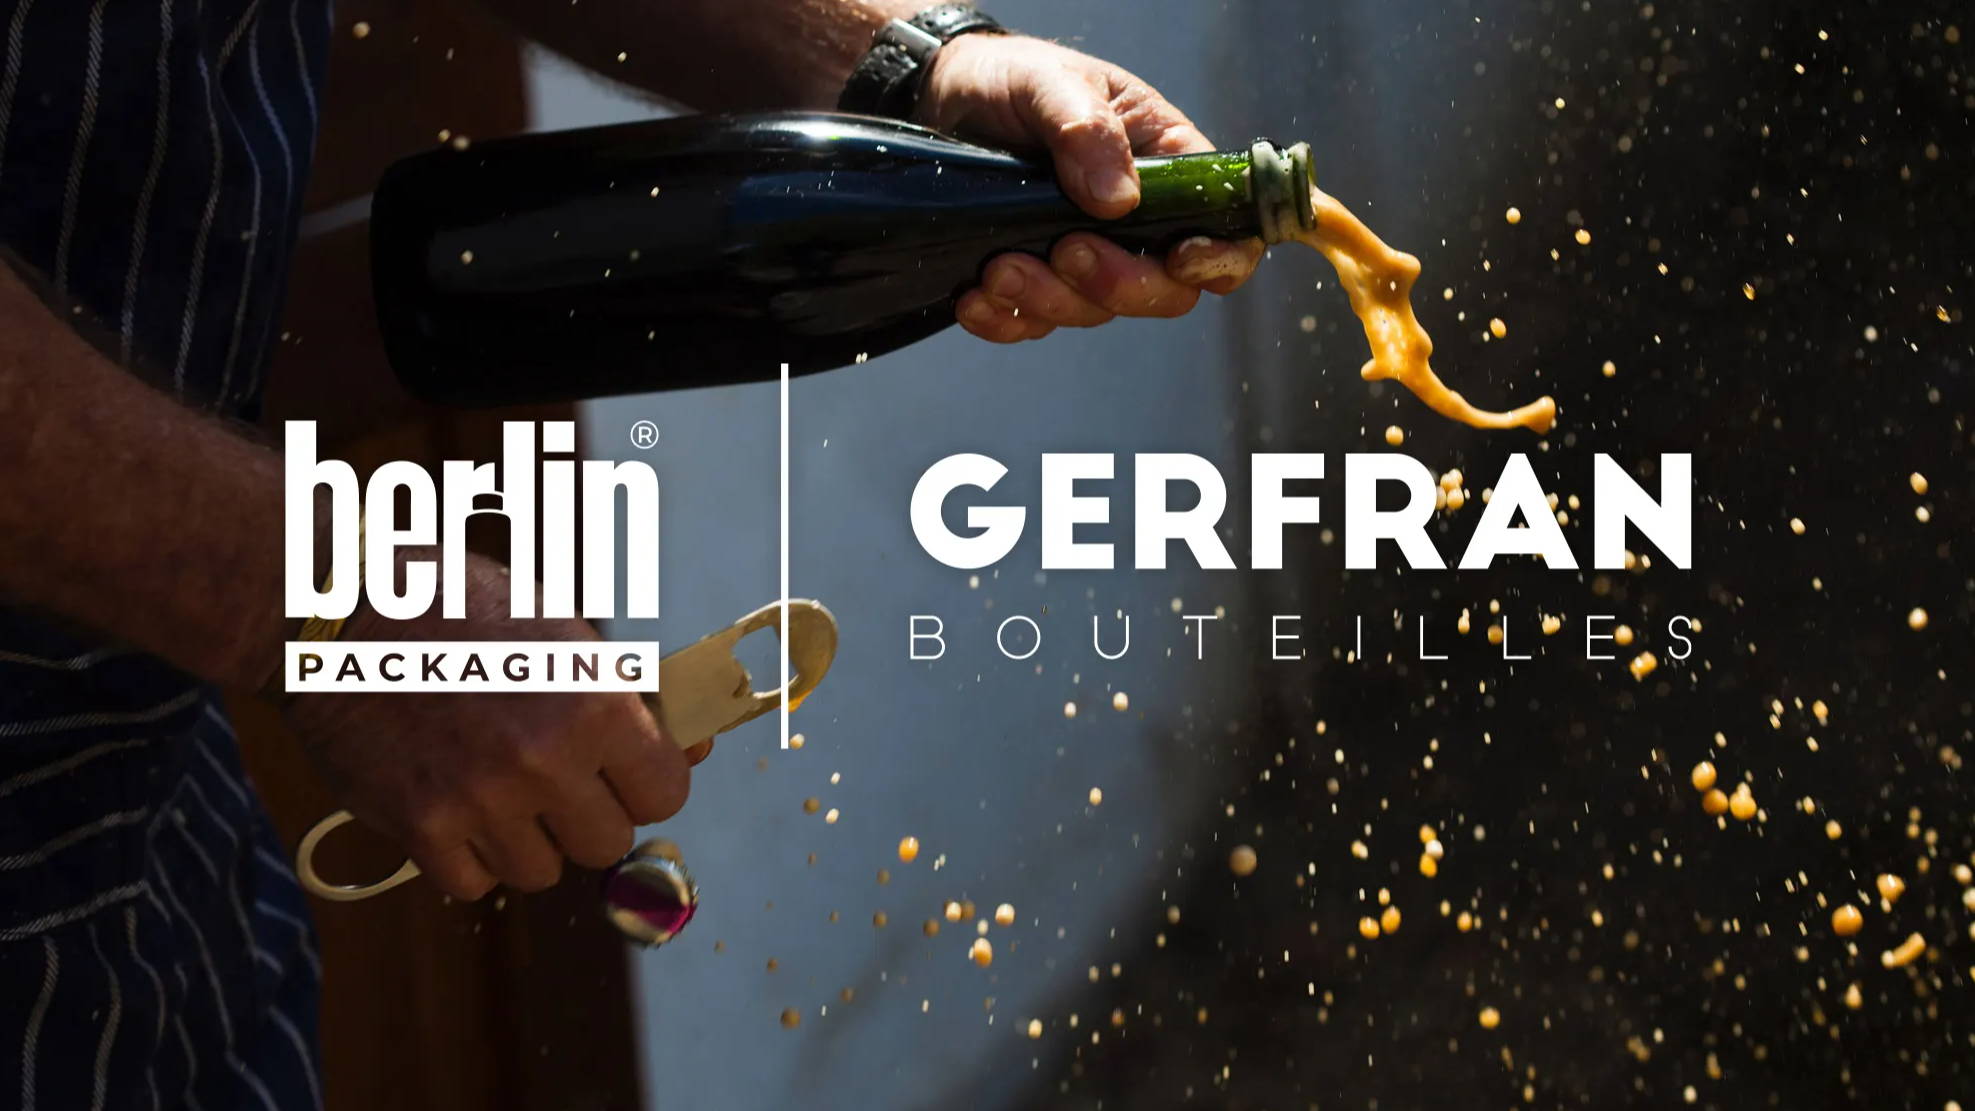 Berlin Packaging Continues European Expansion with the Acquisition of Gerfran SAS